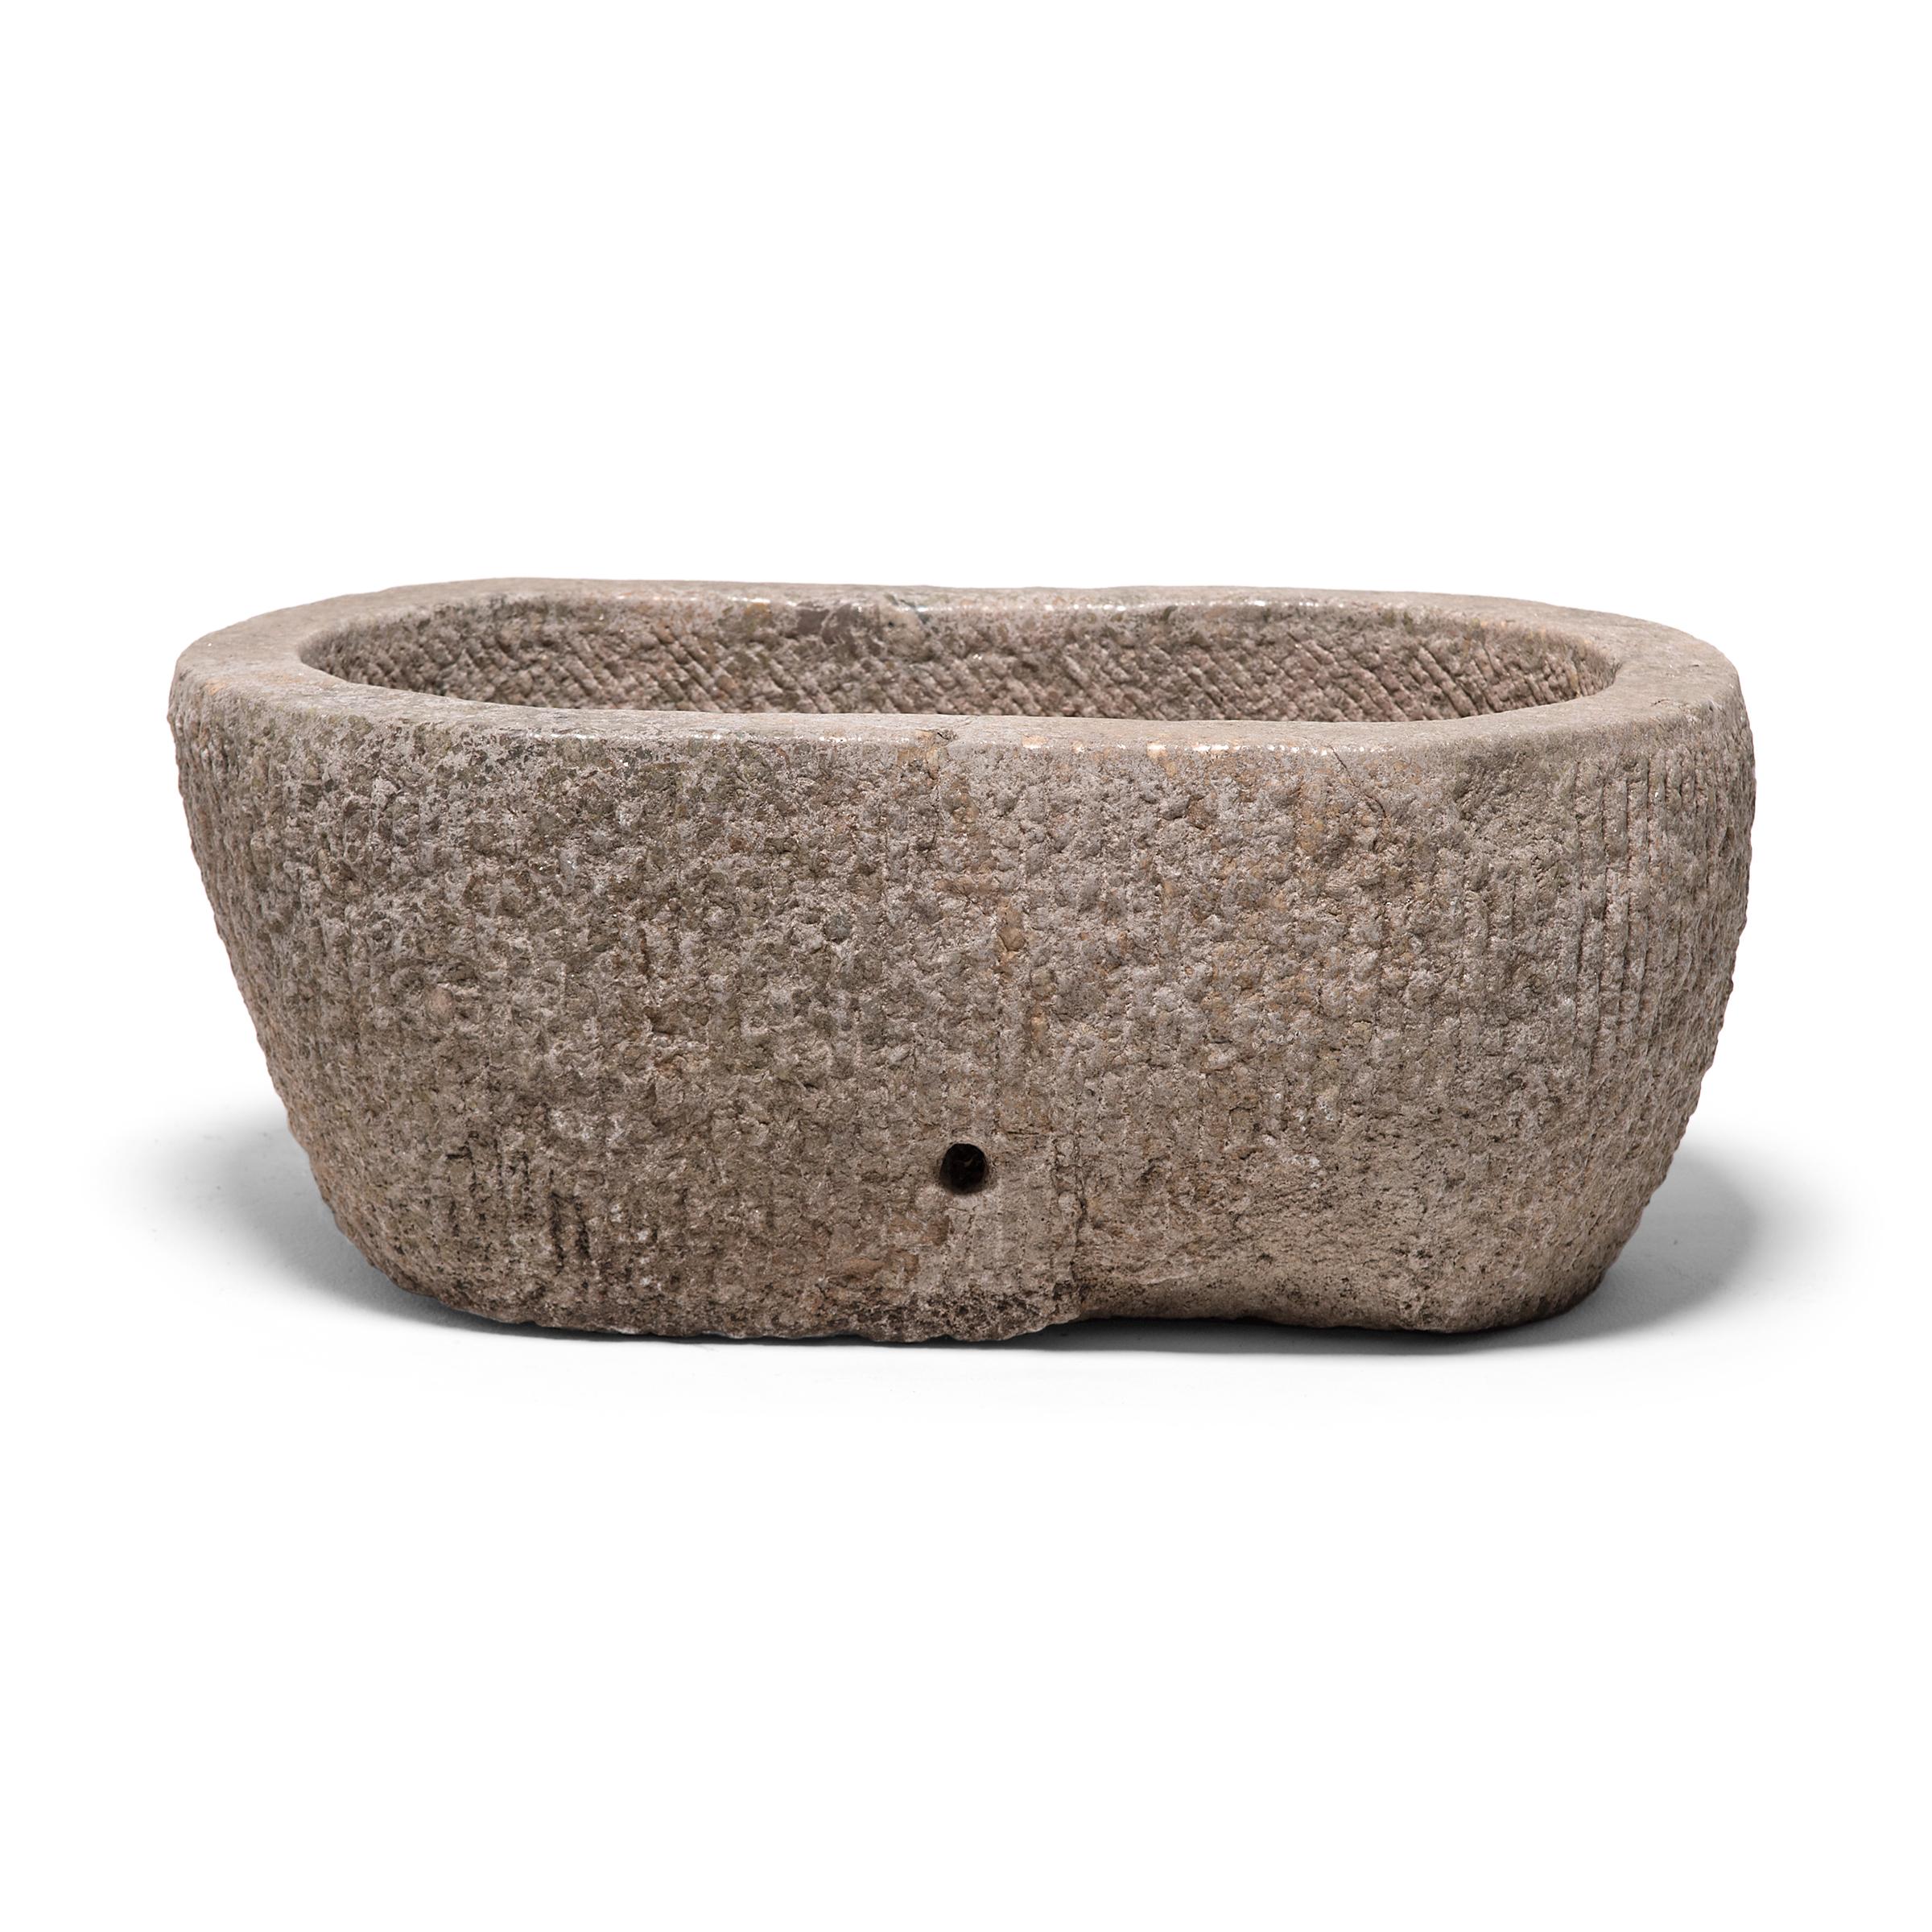 Qing 19th Century Chinese Oval Stone Trough